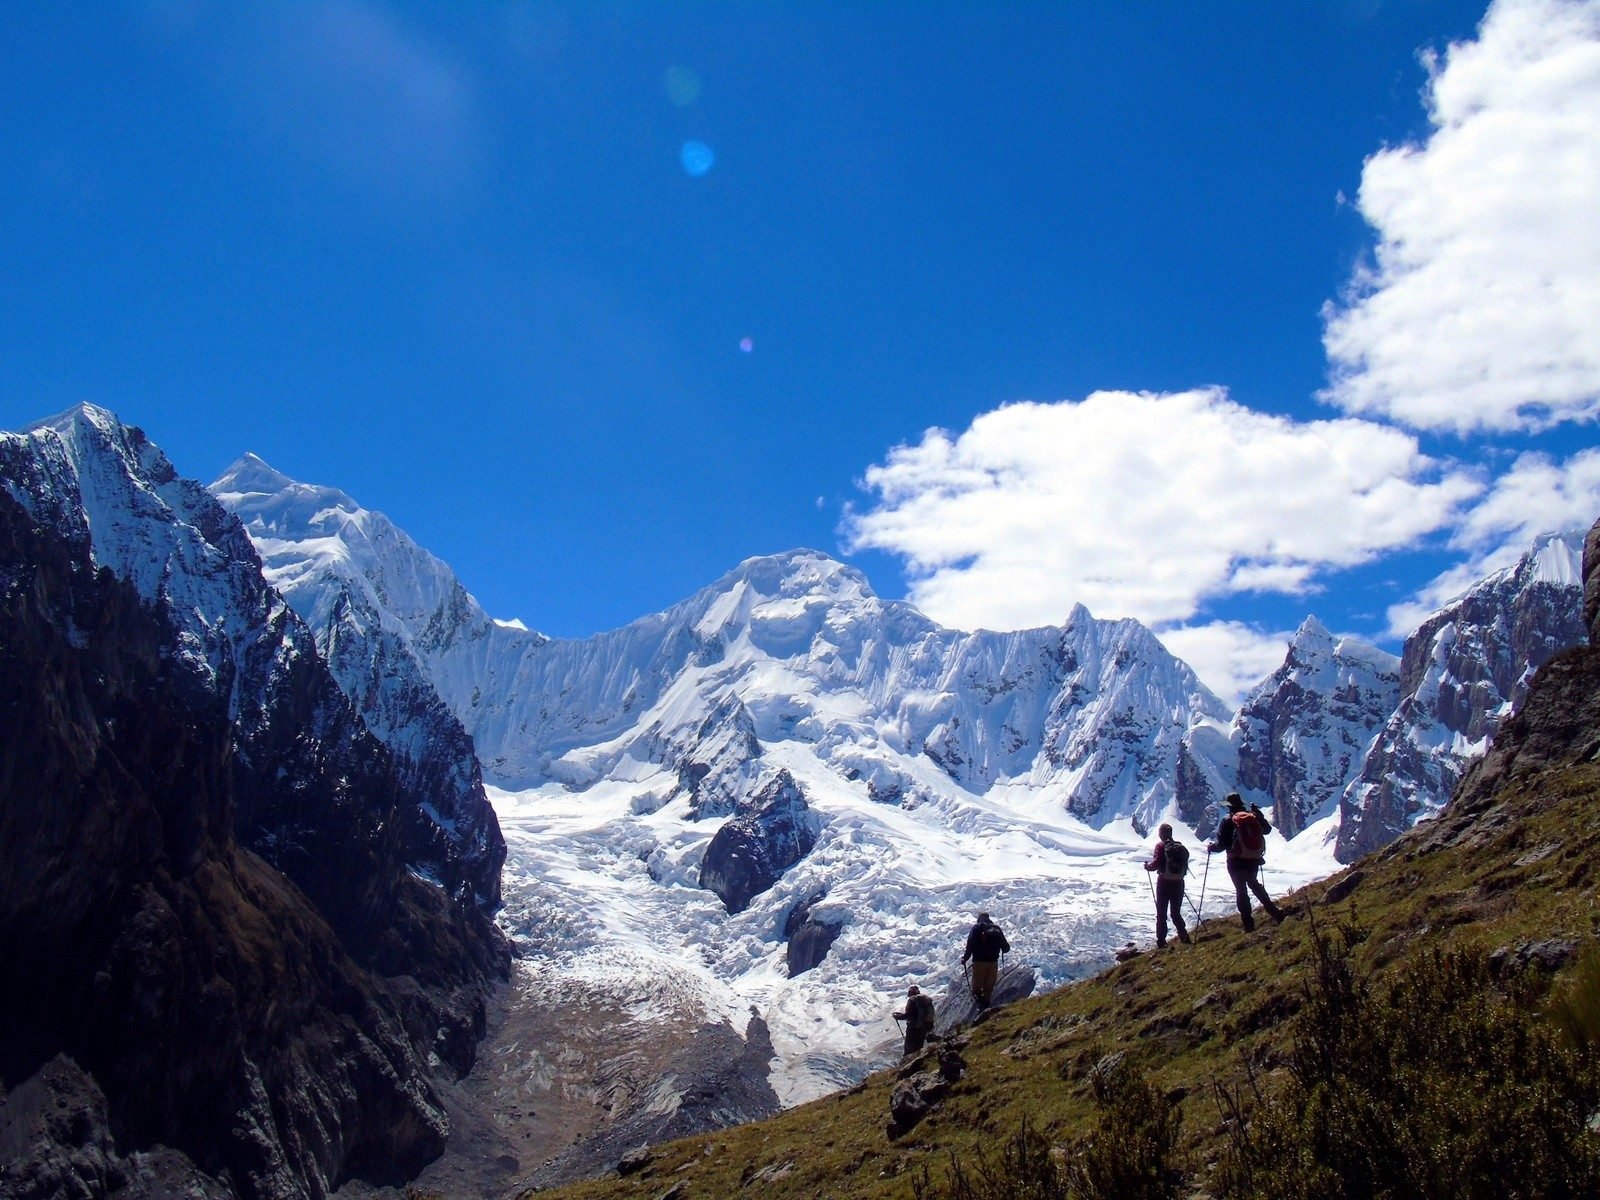 Hikers in Peru, snow capped mountain peaks in the background.